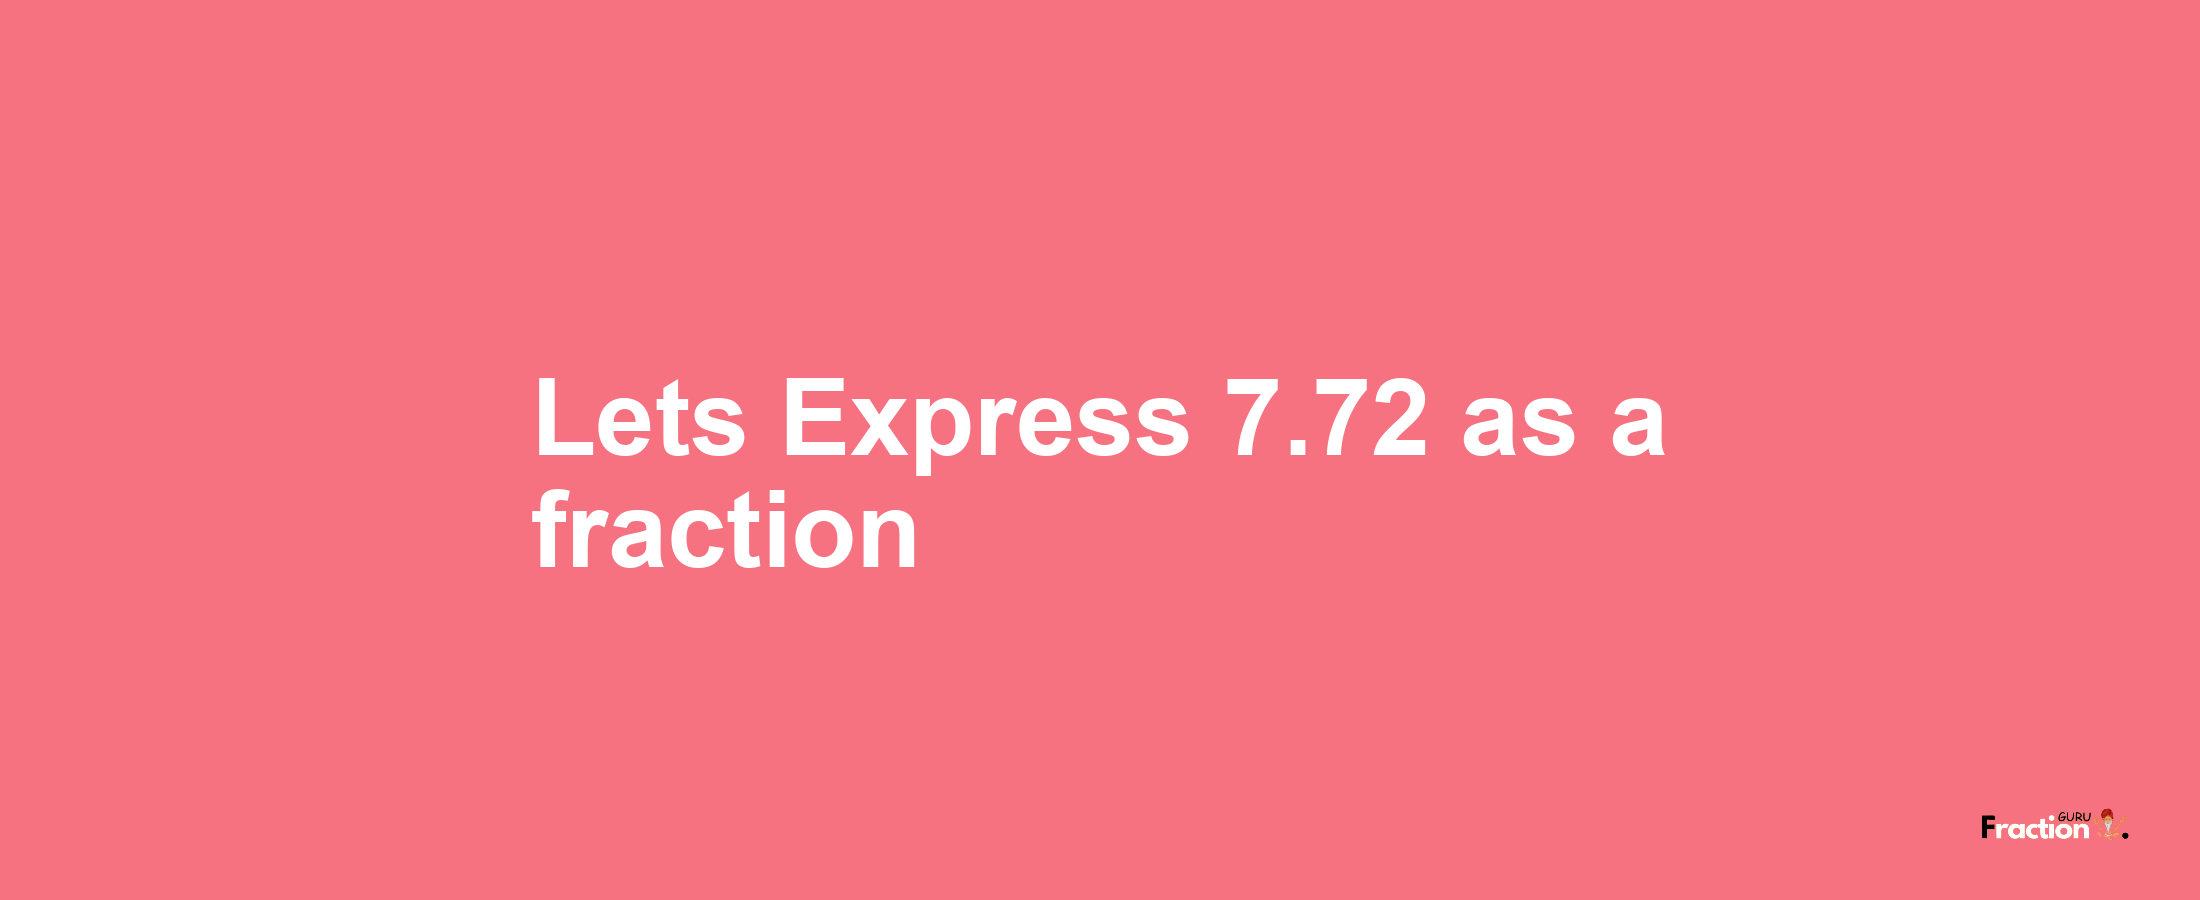 Lets Express 7.72 as afraction